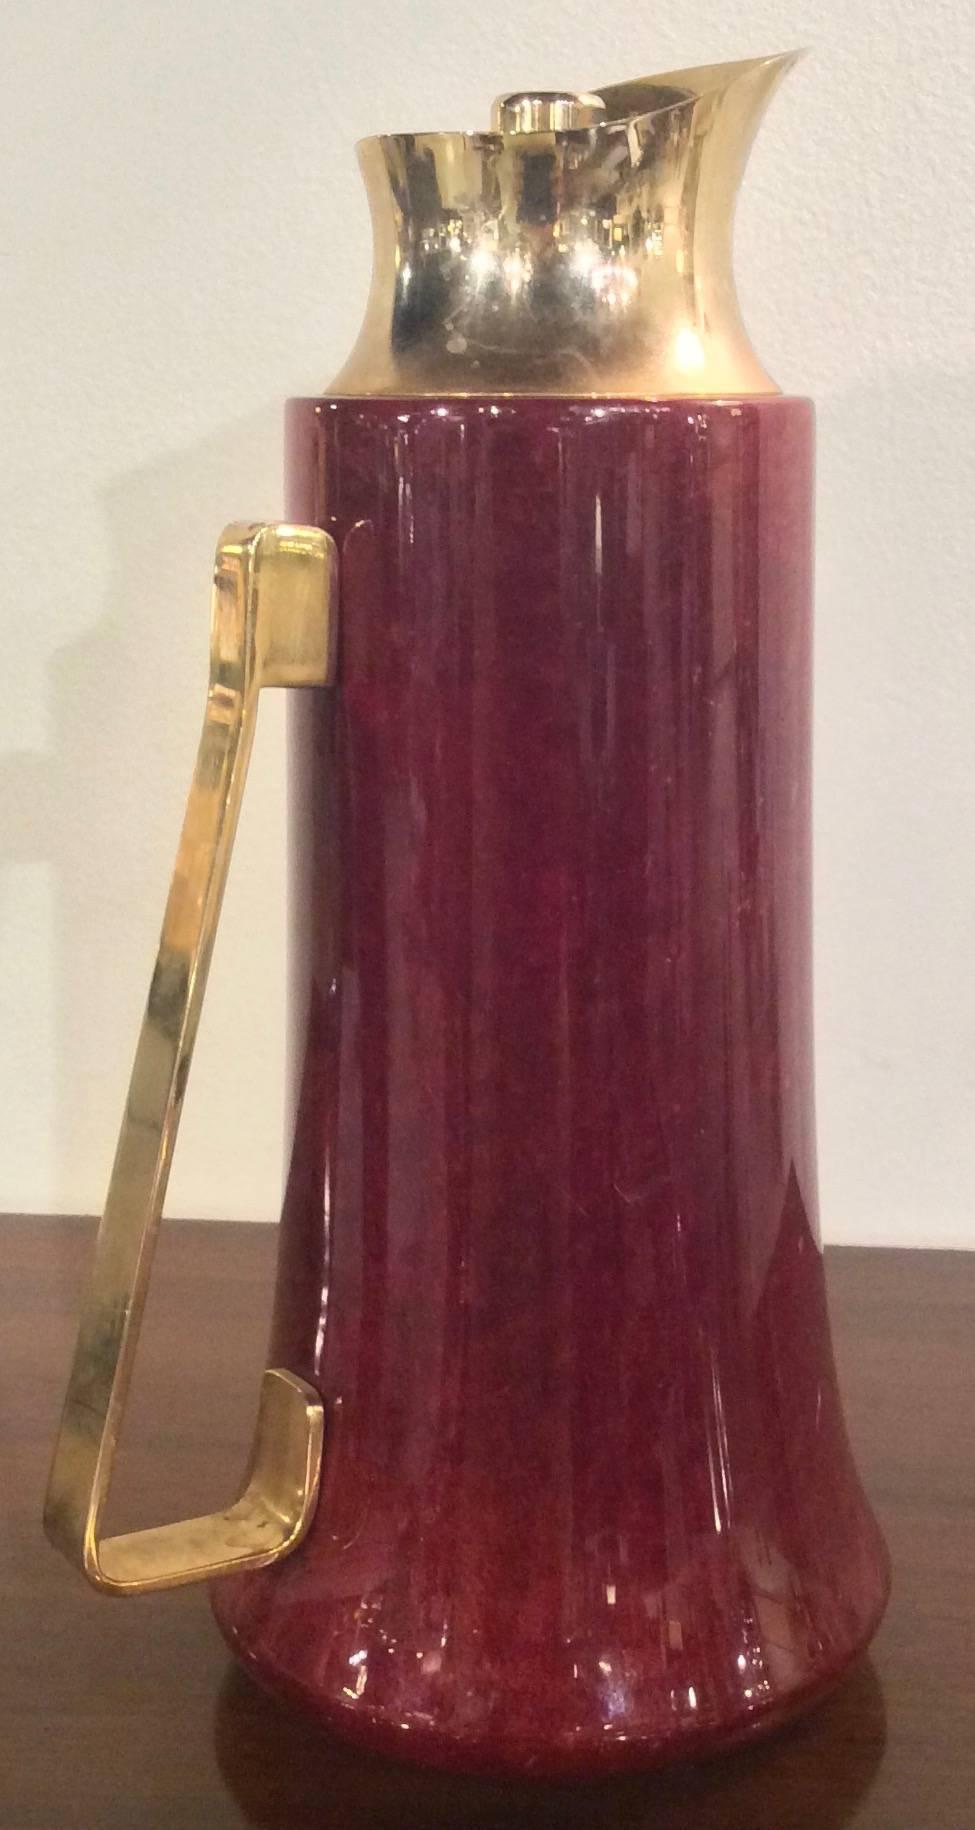 Made in Italy, gorgeous oxblood red, Aldo Tura, lacquered goatskin carafe.
 